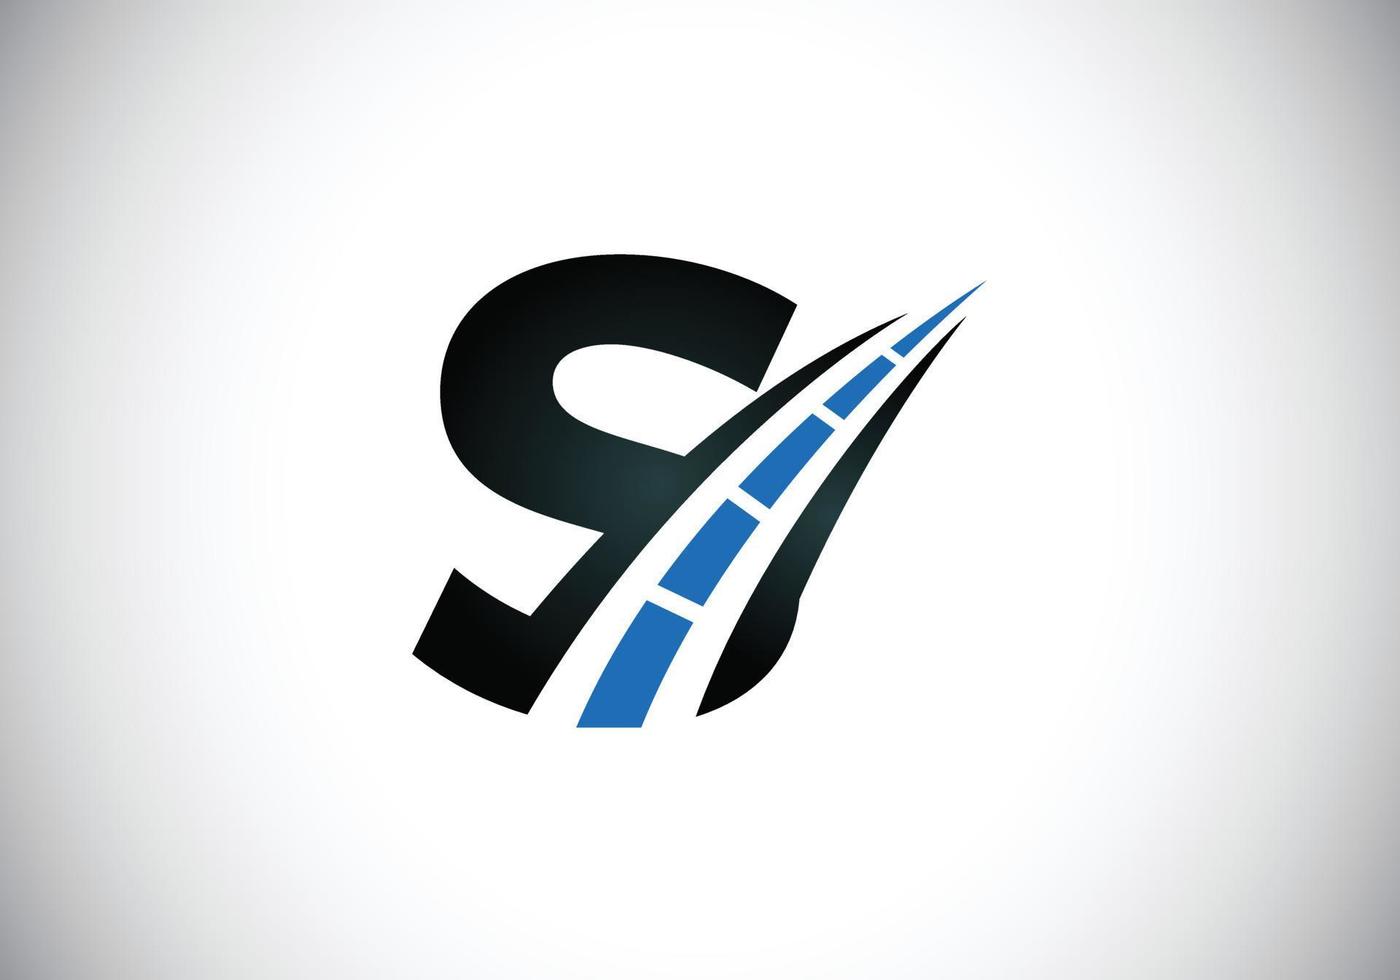 Letter S with road logo sing. The creative design concept for highway maintenance and construction. Transportation and traffic theme. vector